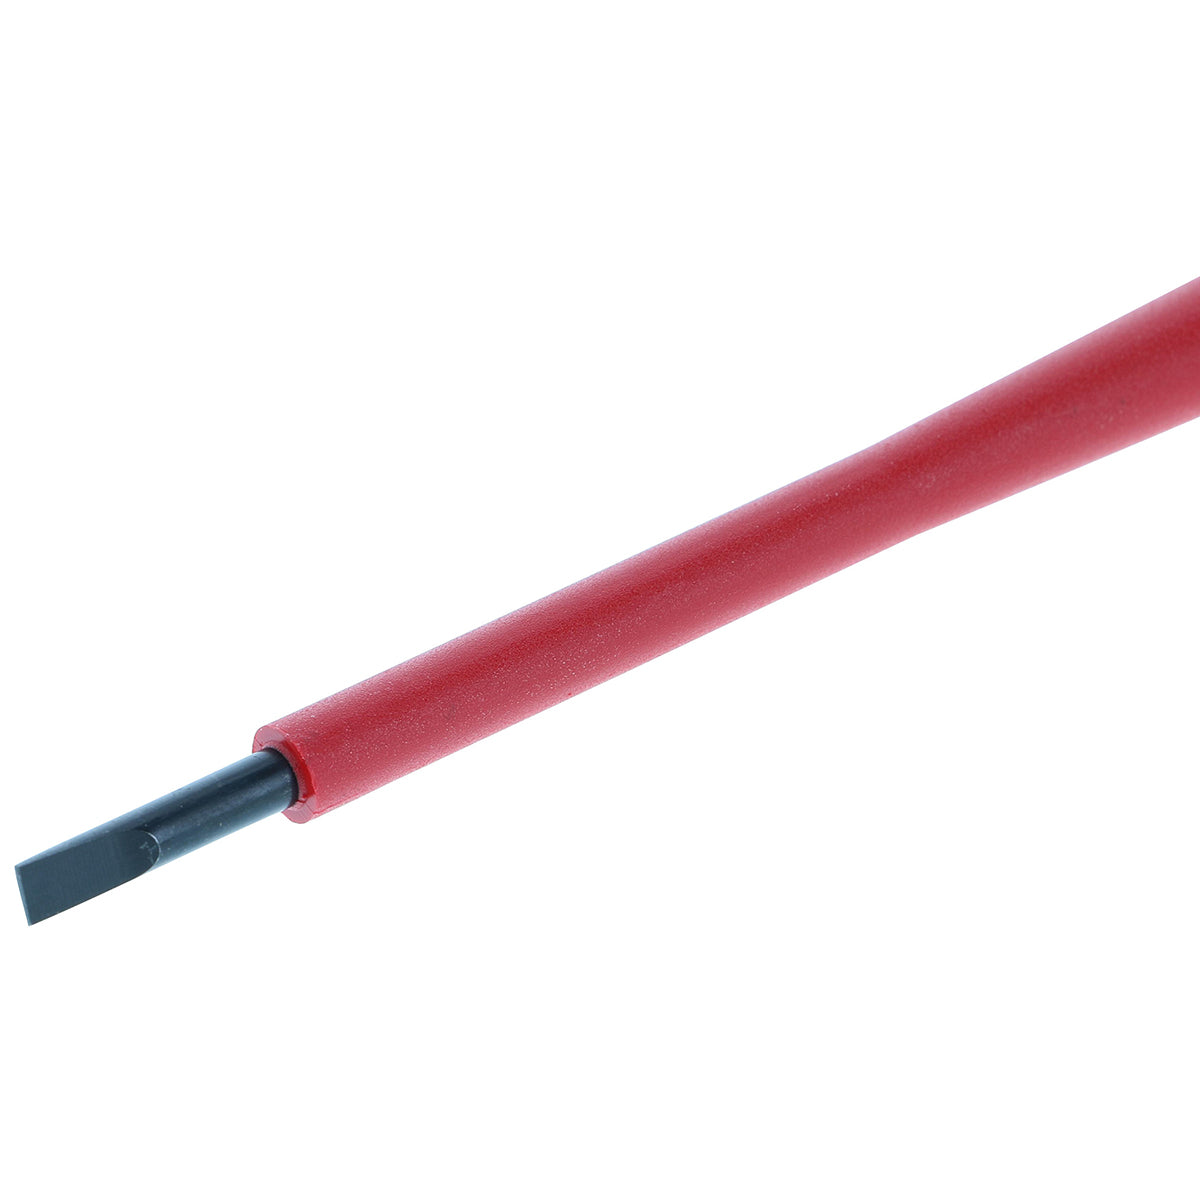 Wiha 32012 Insulated Slotted Screwdriver – 3.0mm x 100mm